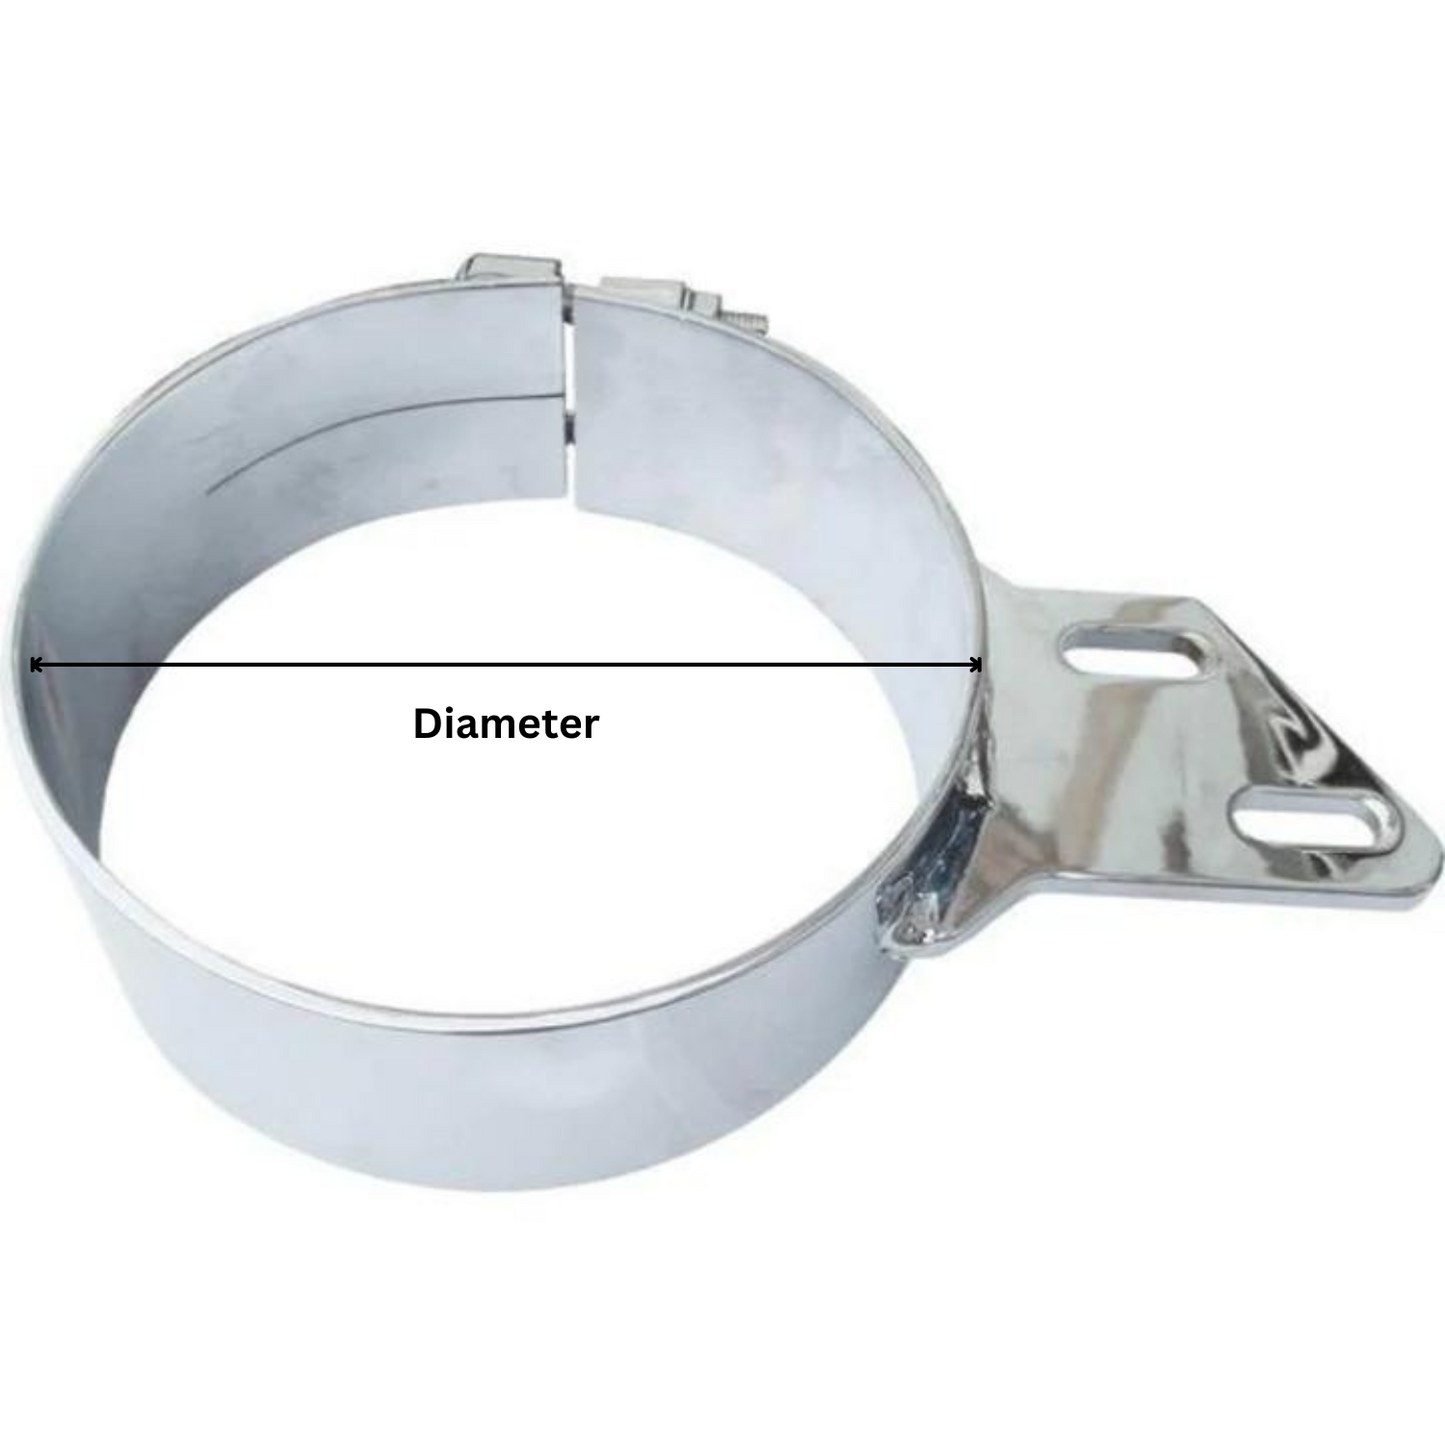 Premium Stainless Steel Clamp with Angled Bracket